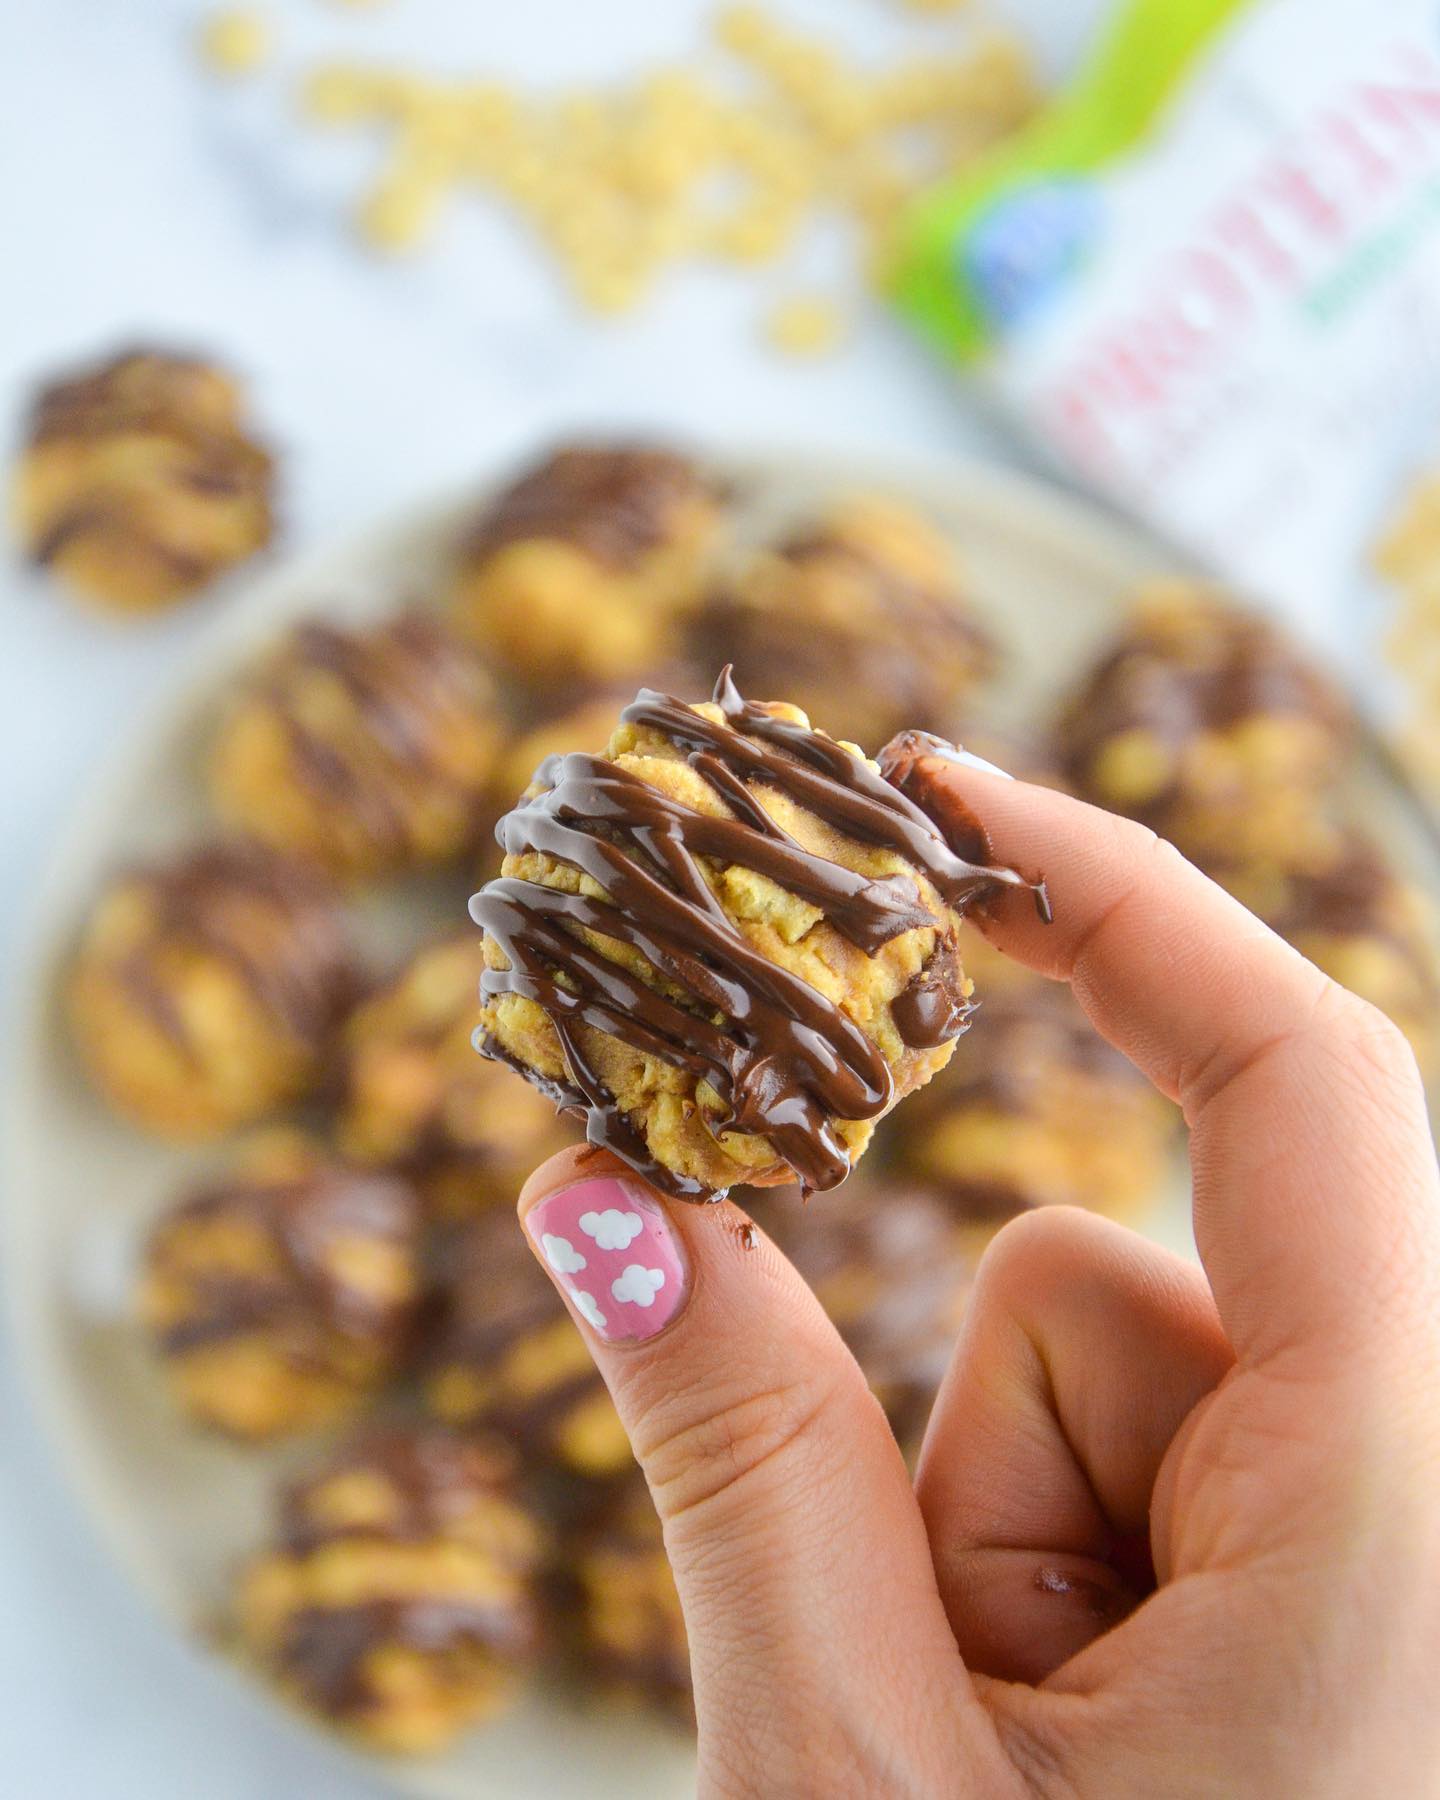 Peanut Butter Chocolate Cereal Bites